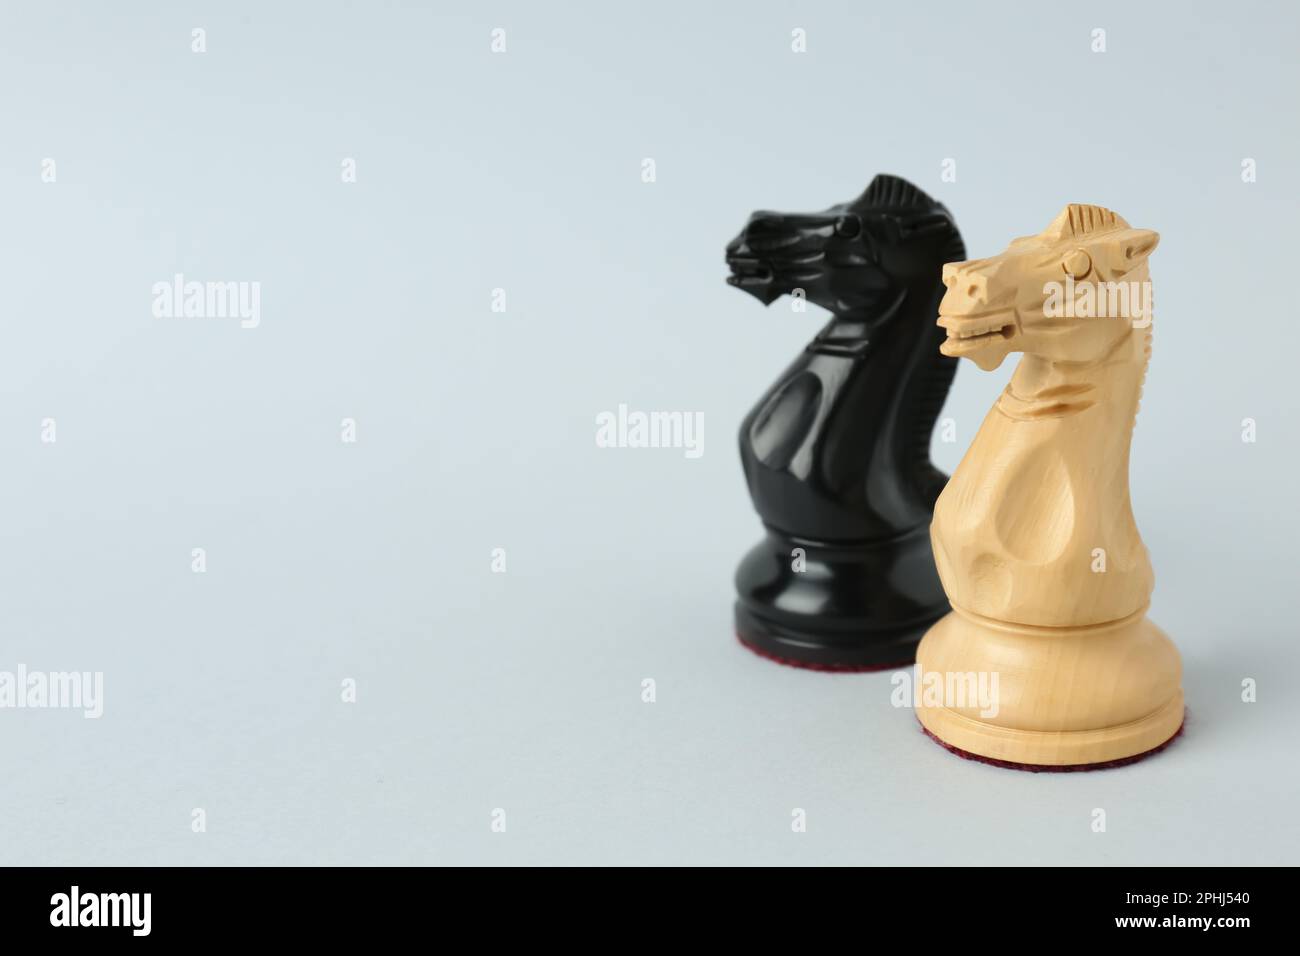 Premium Photo  Wooden chessboard with figures in light and dark brown  tones isolate on a white background